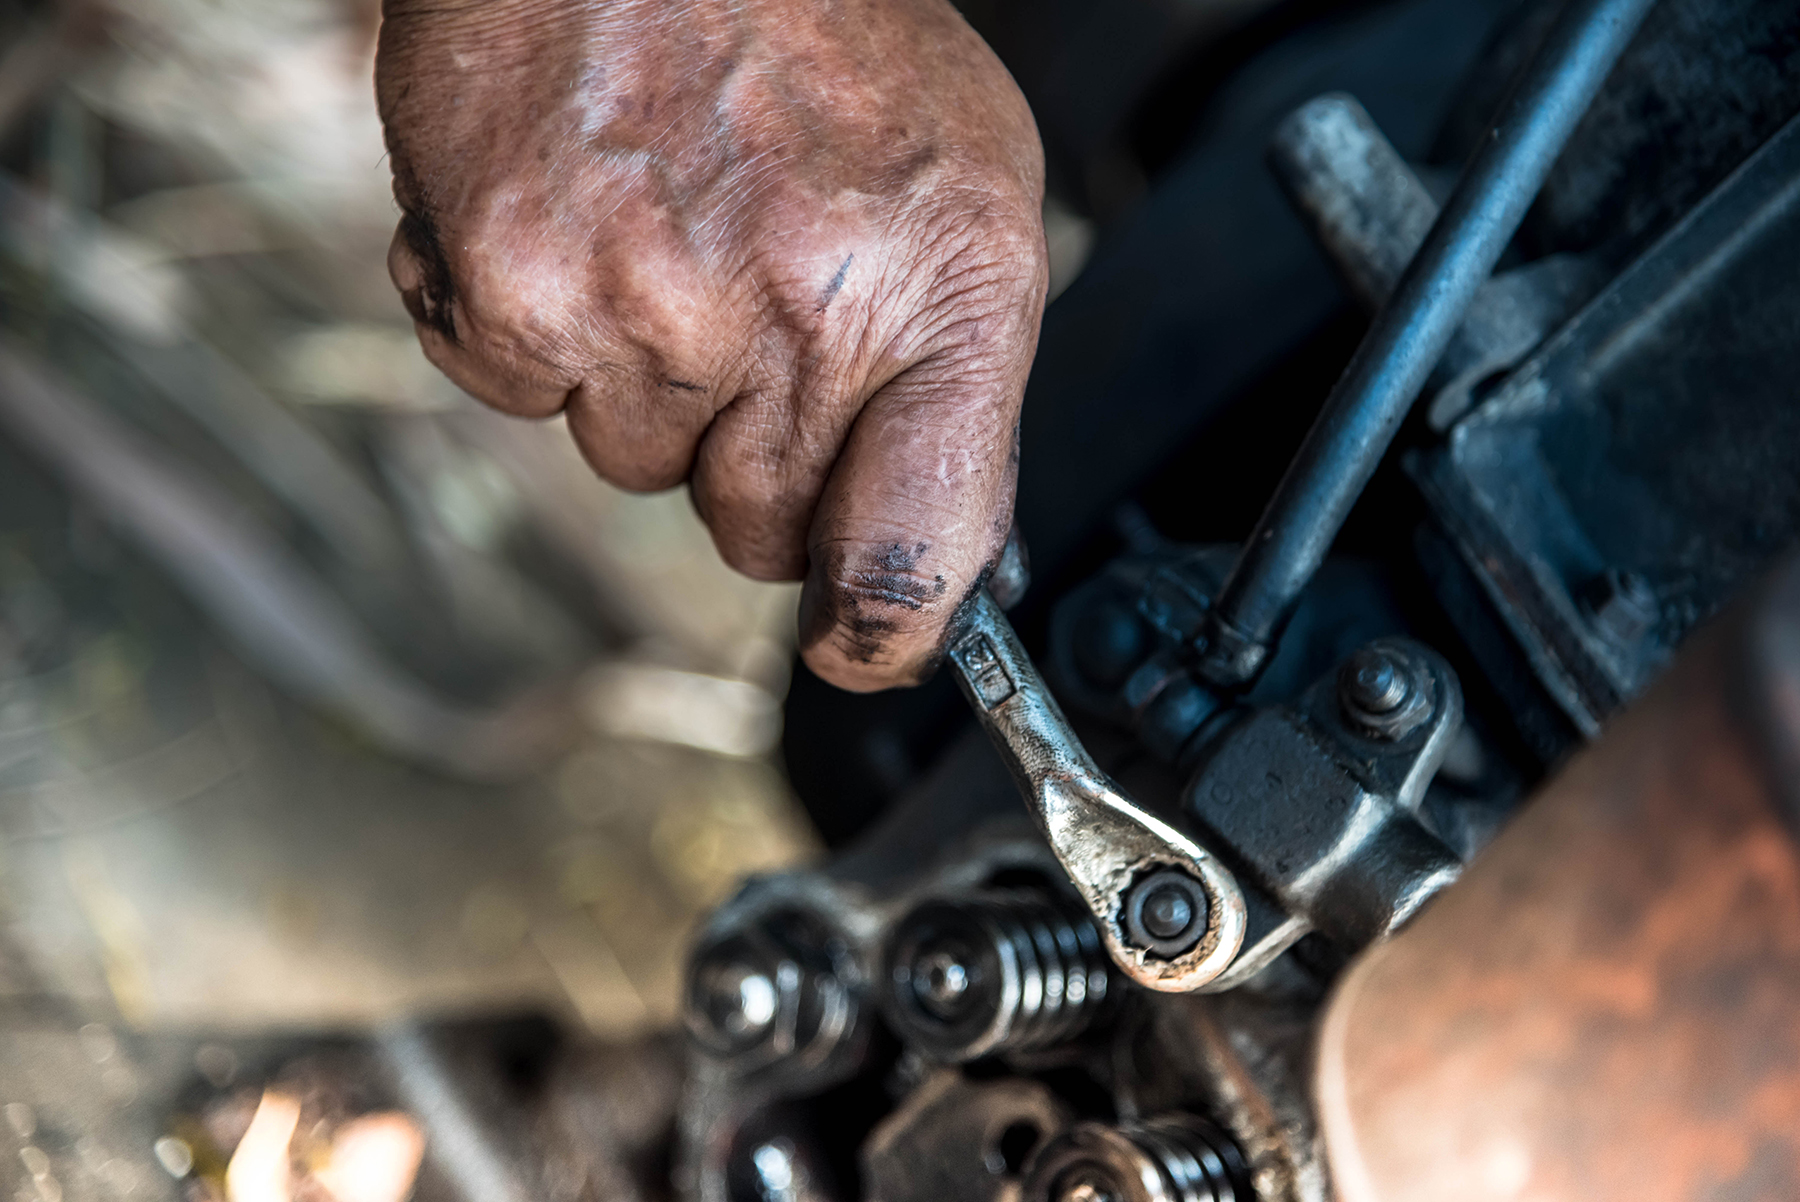 Hands repairing a engine with a wrench